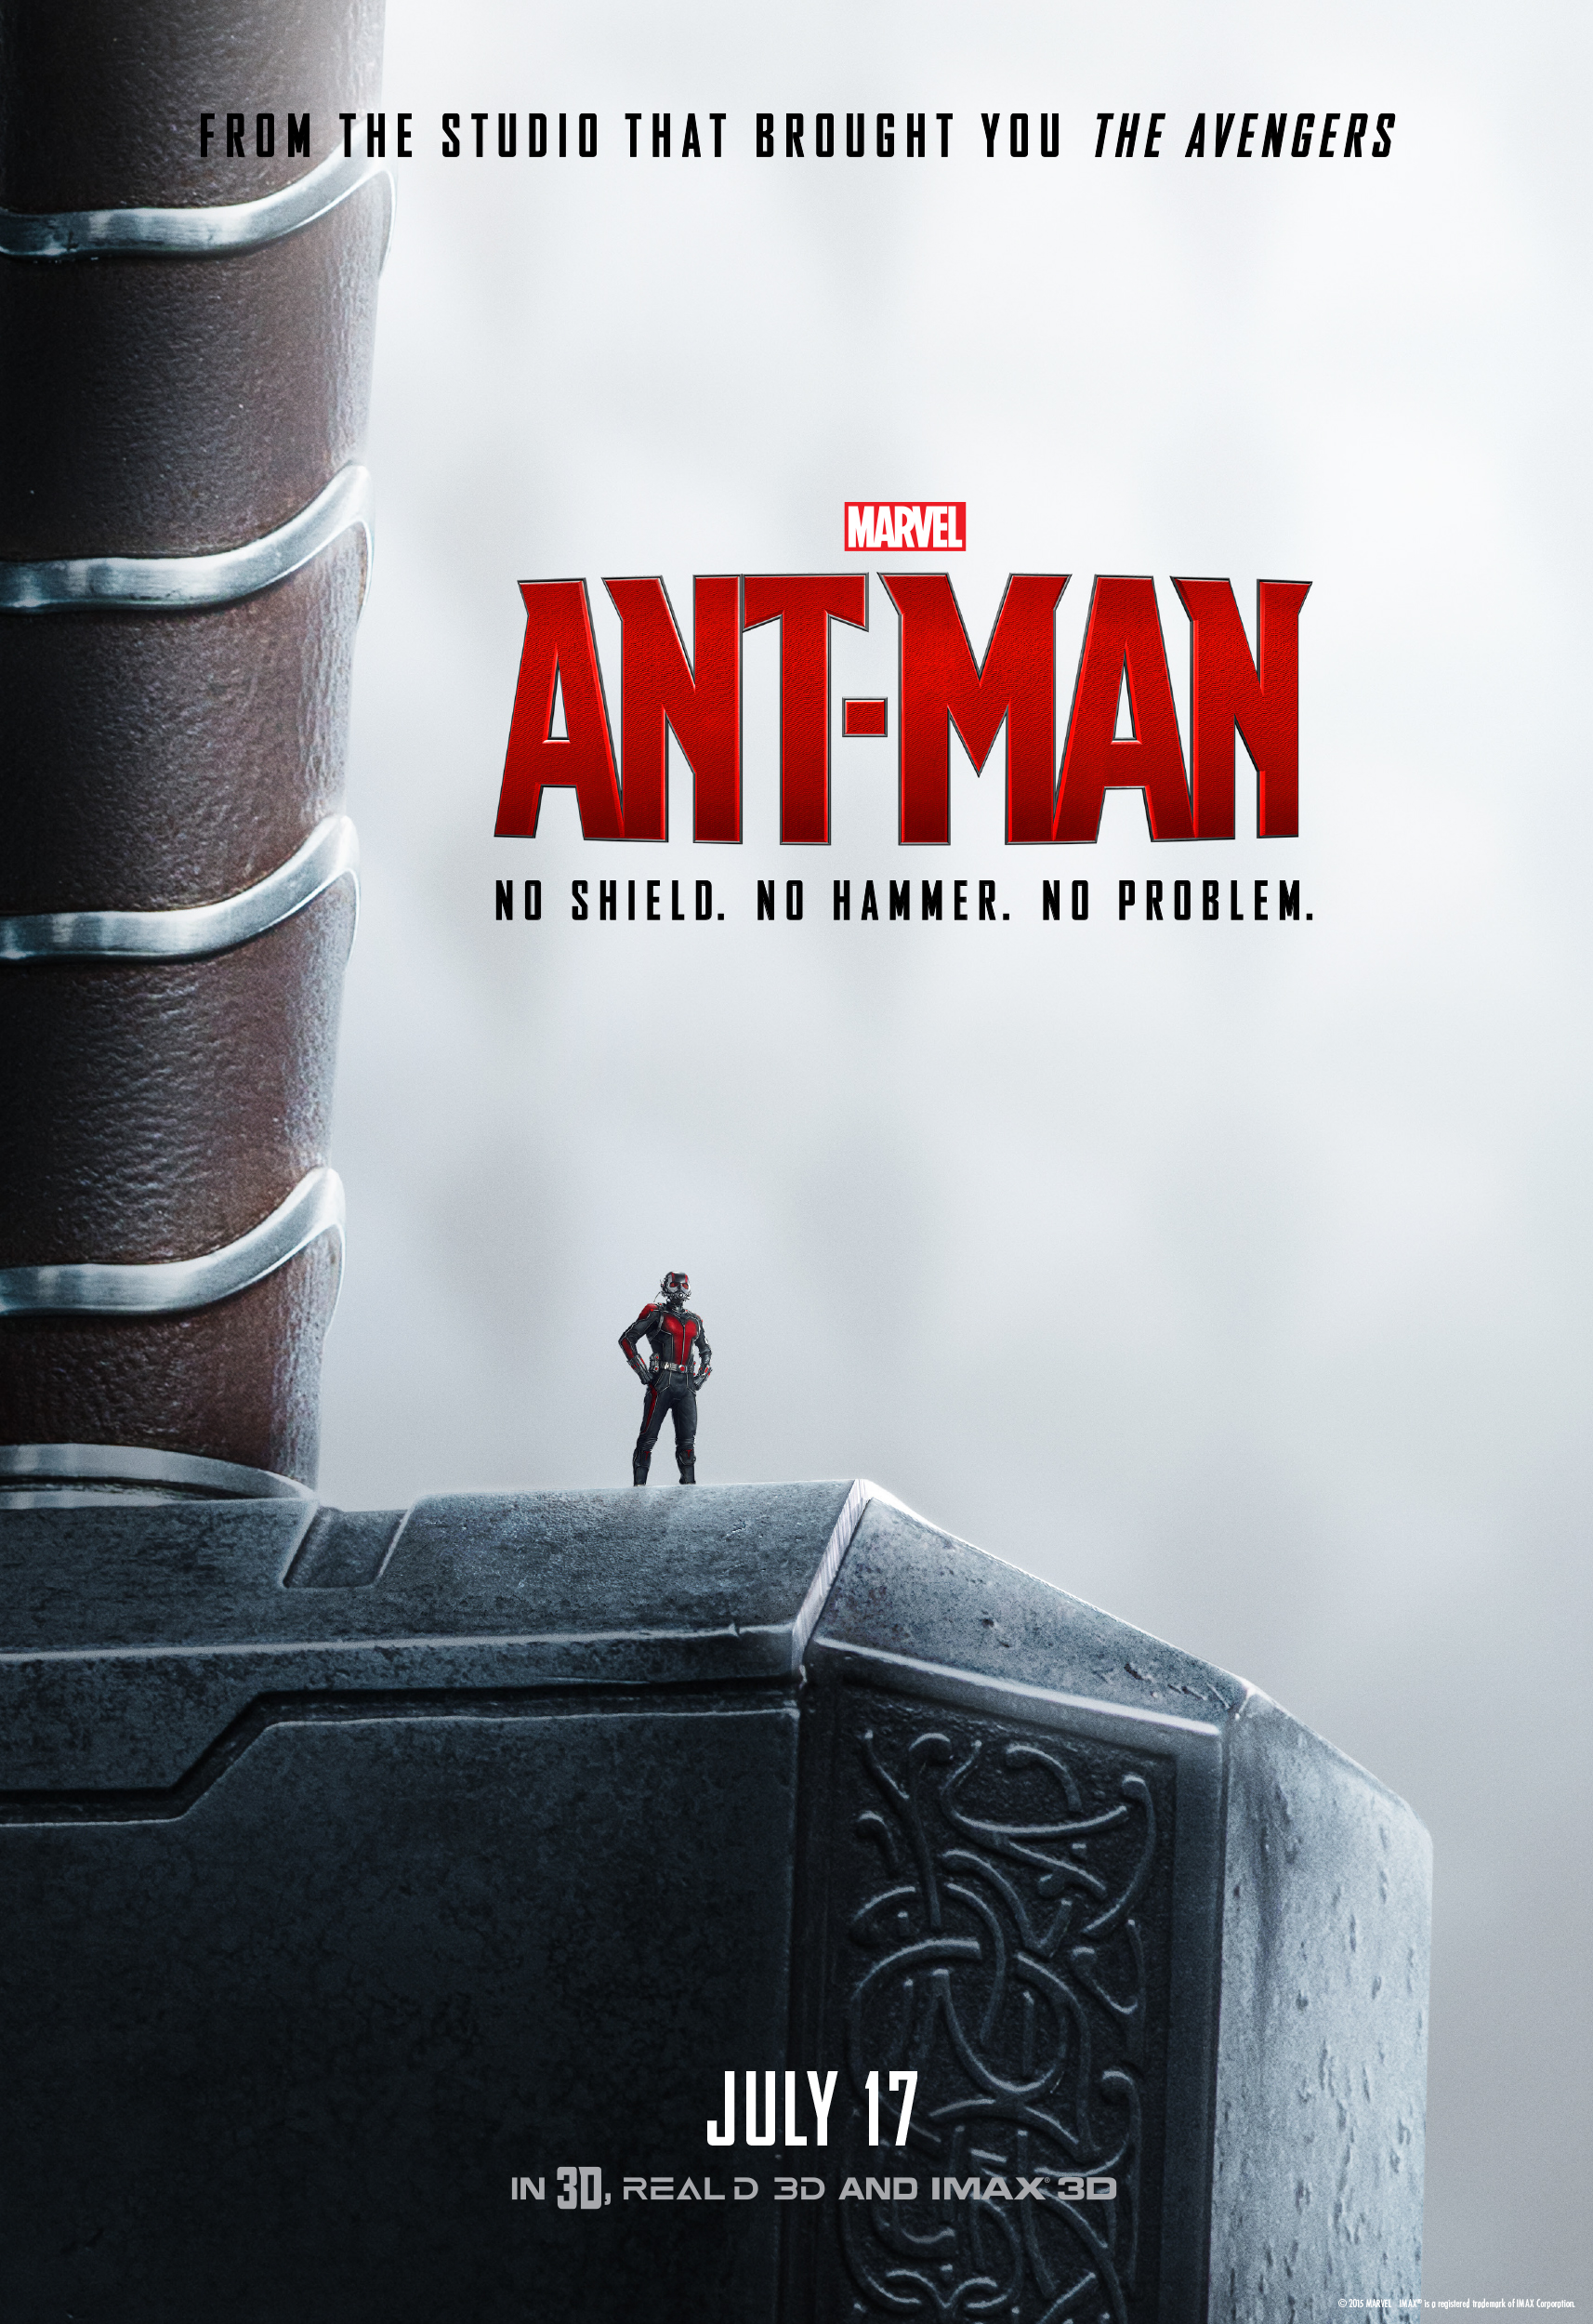 Marvel Releases Three New Posters for Upcoming Film “Ant-Man